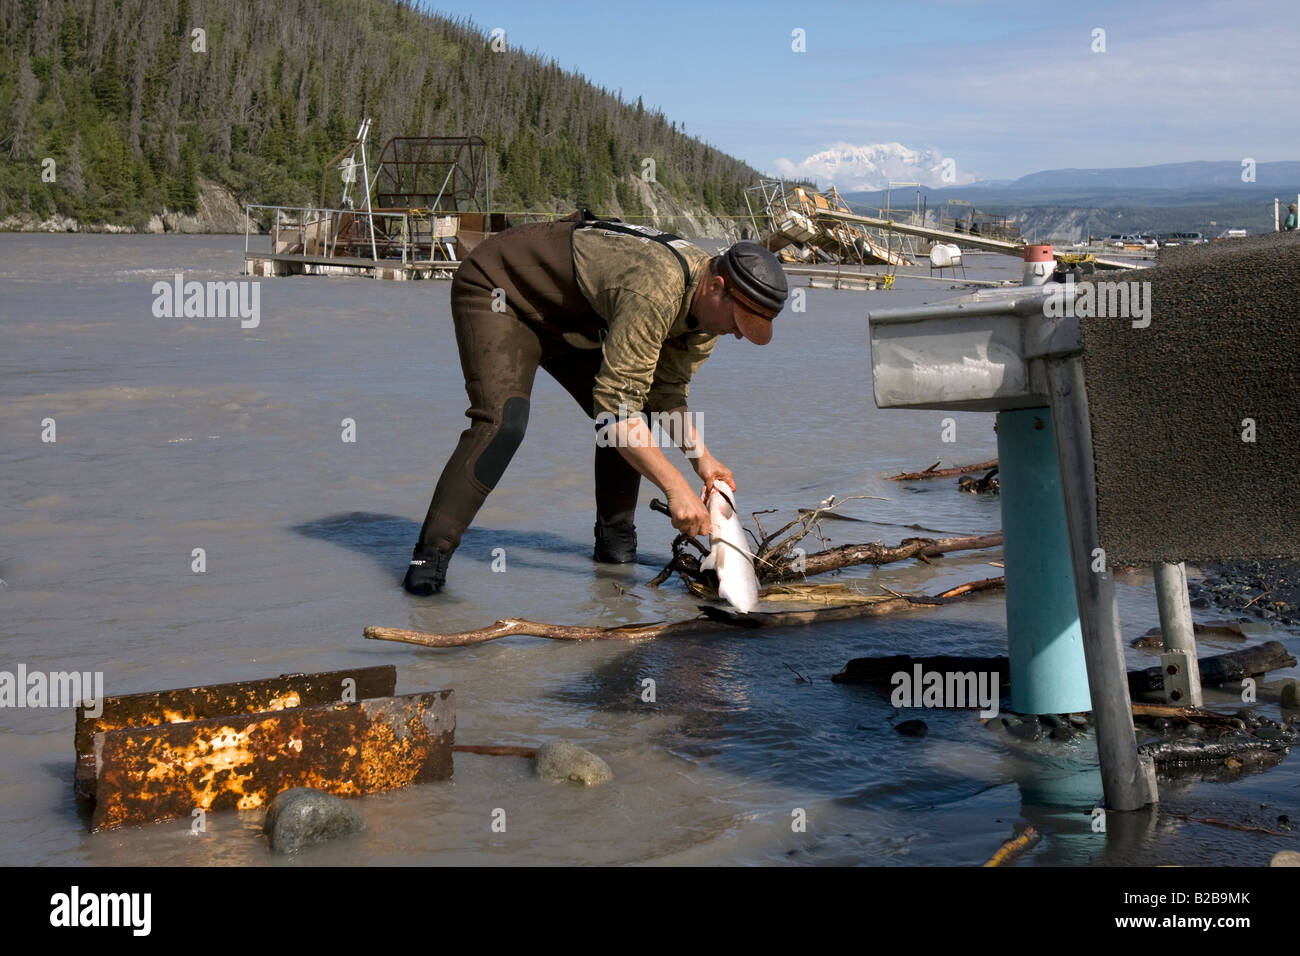 Fisherman cleaning salmon he caught in the Copper RIver near Chitina, Alaska. Stock Photo